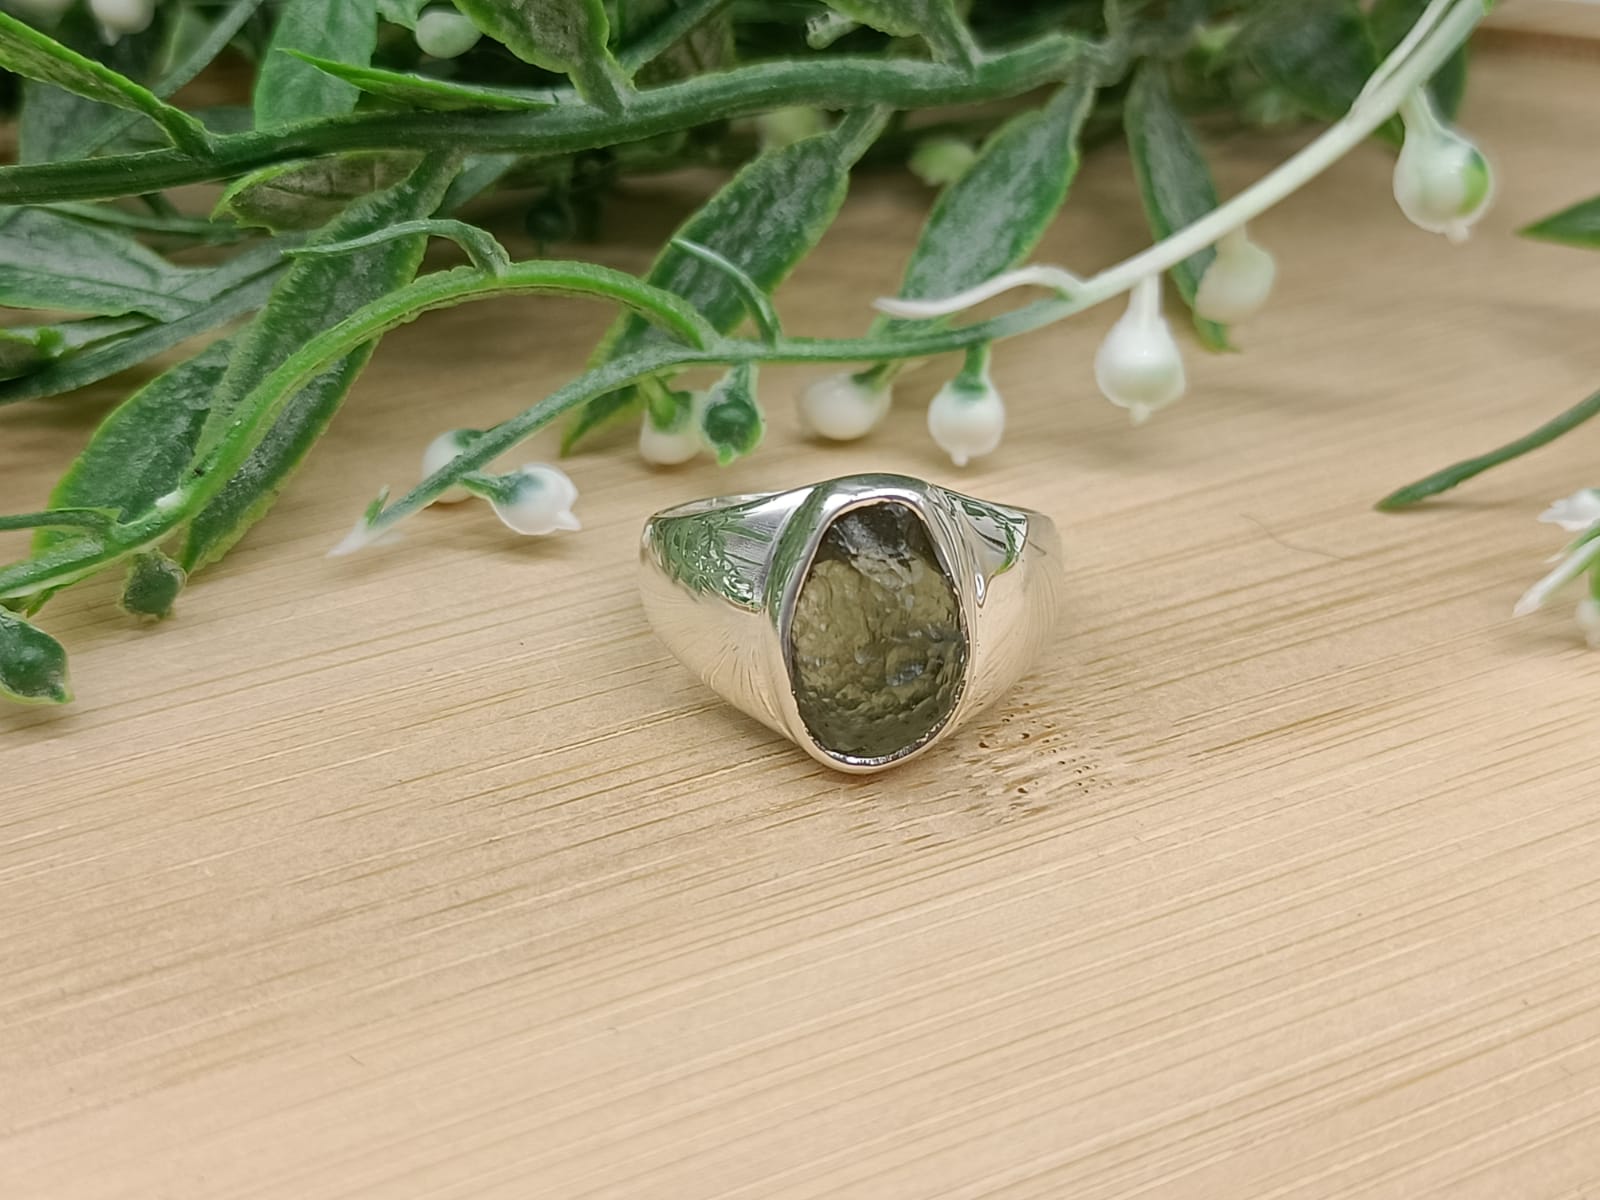 Authentic Moldavite Solid 925 Sterling Silver Ring Size 9.5 or S1/2 10x8mm Crystal Wellness